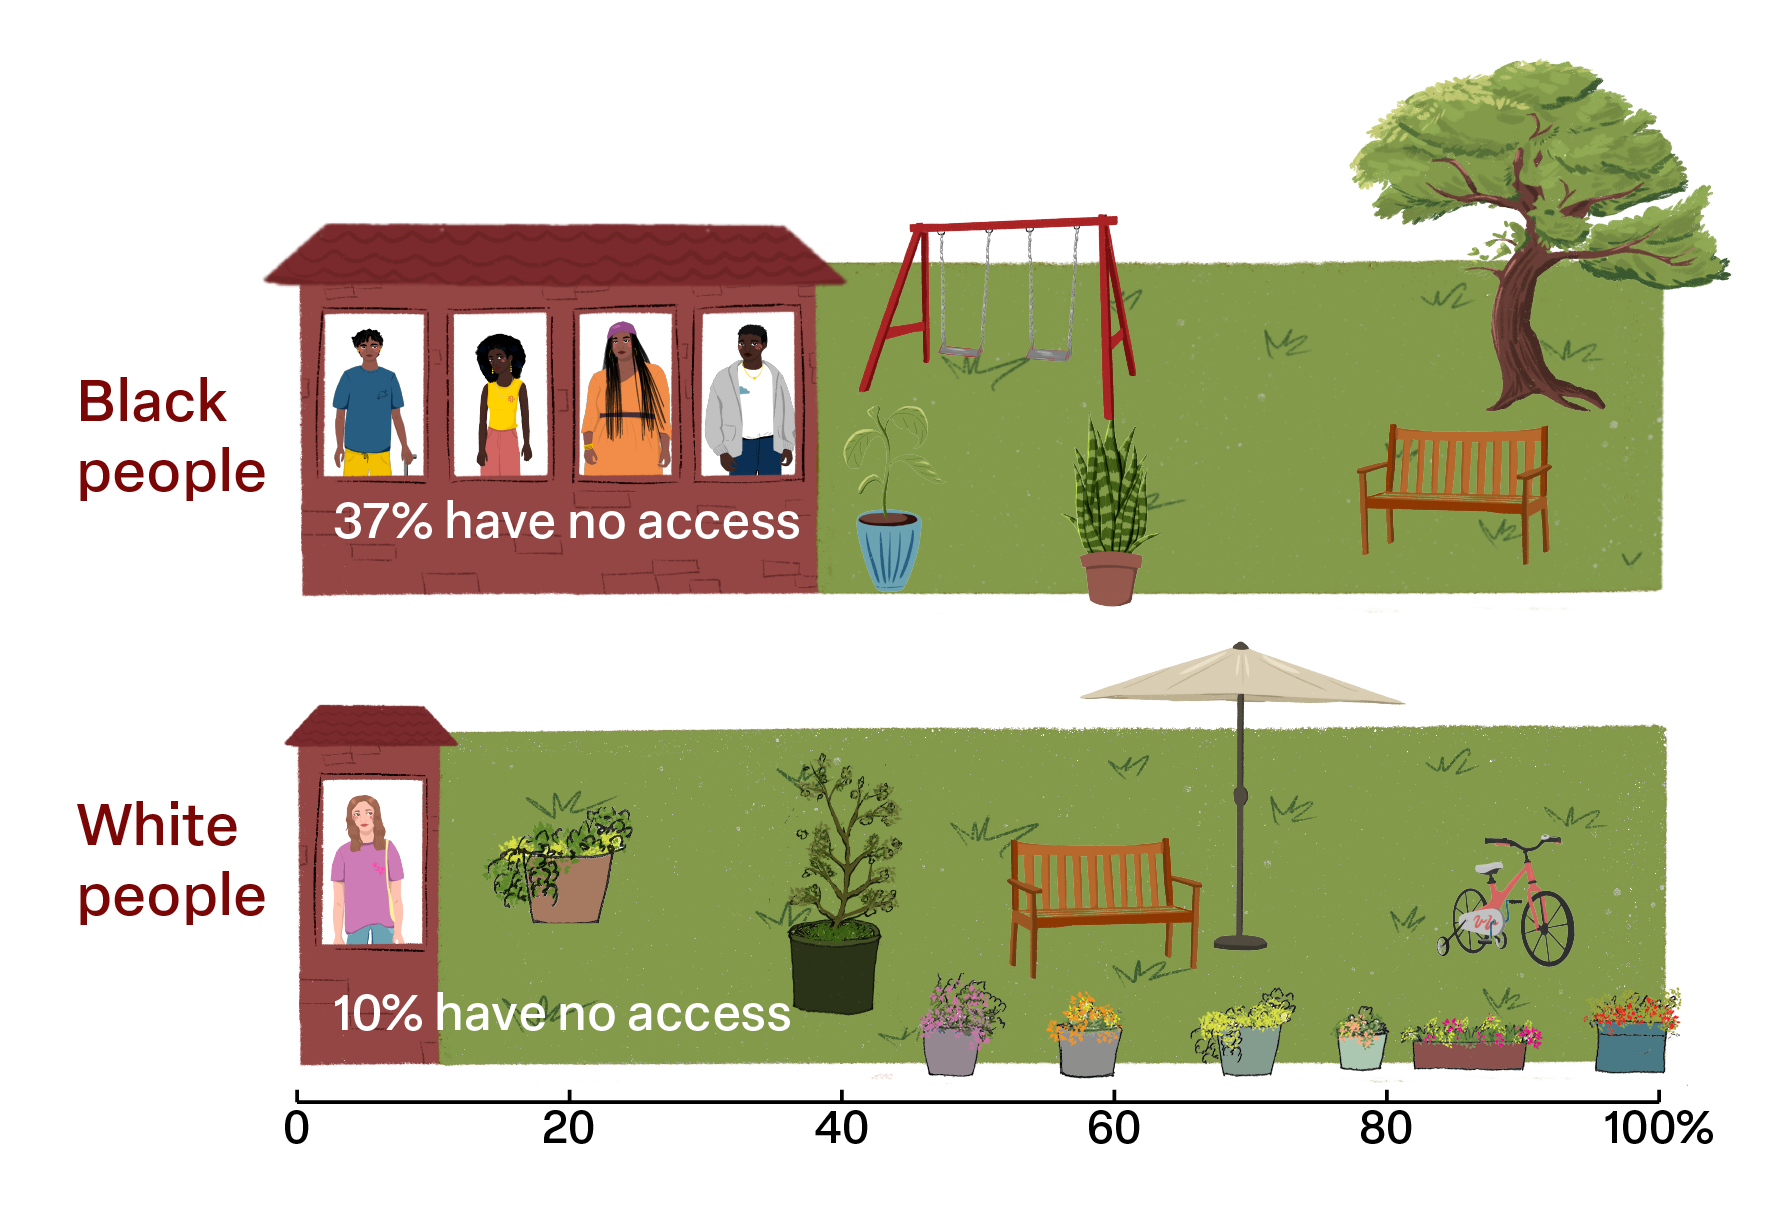 Graph illustration of people in a house next to a garden. The first house shows 37% of Black people have no access to outdoor space. The second house shows 10% of white people have no access to outdoor space.